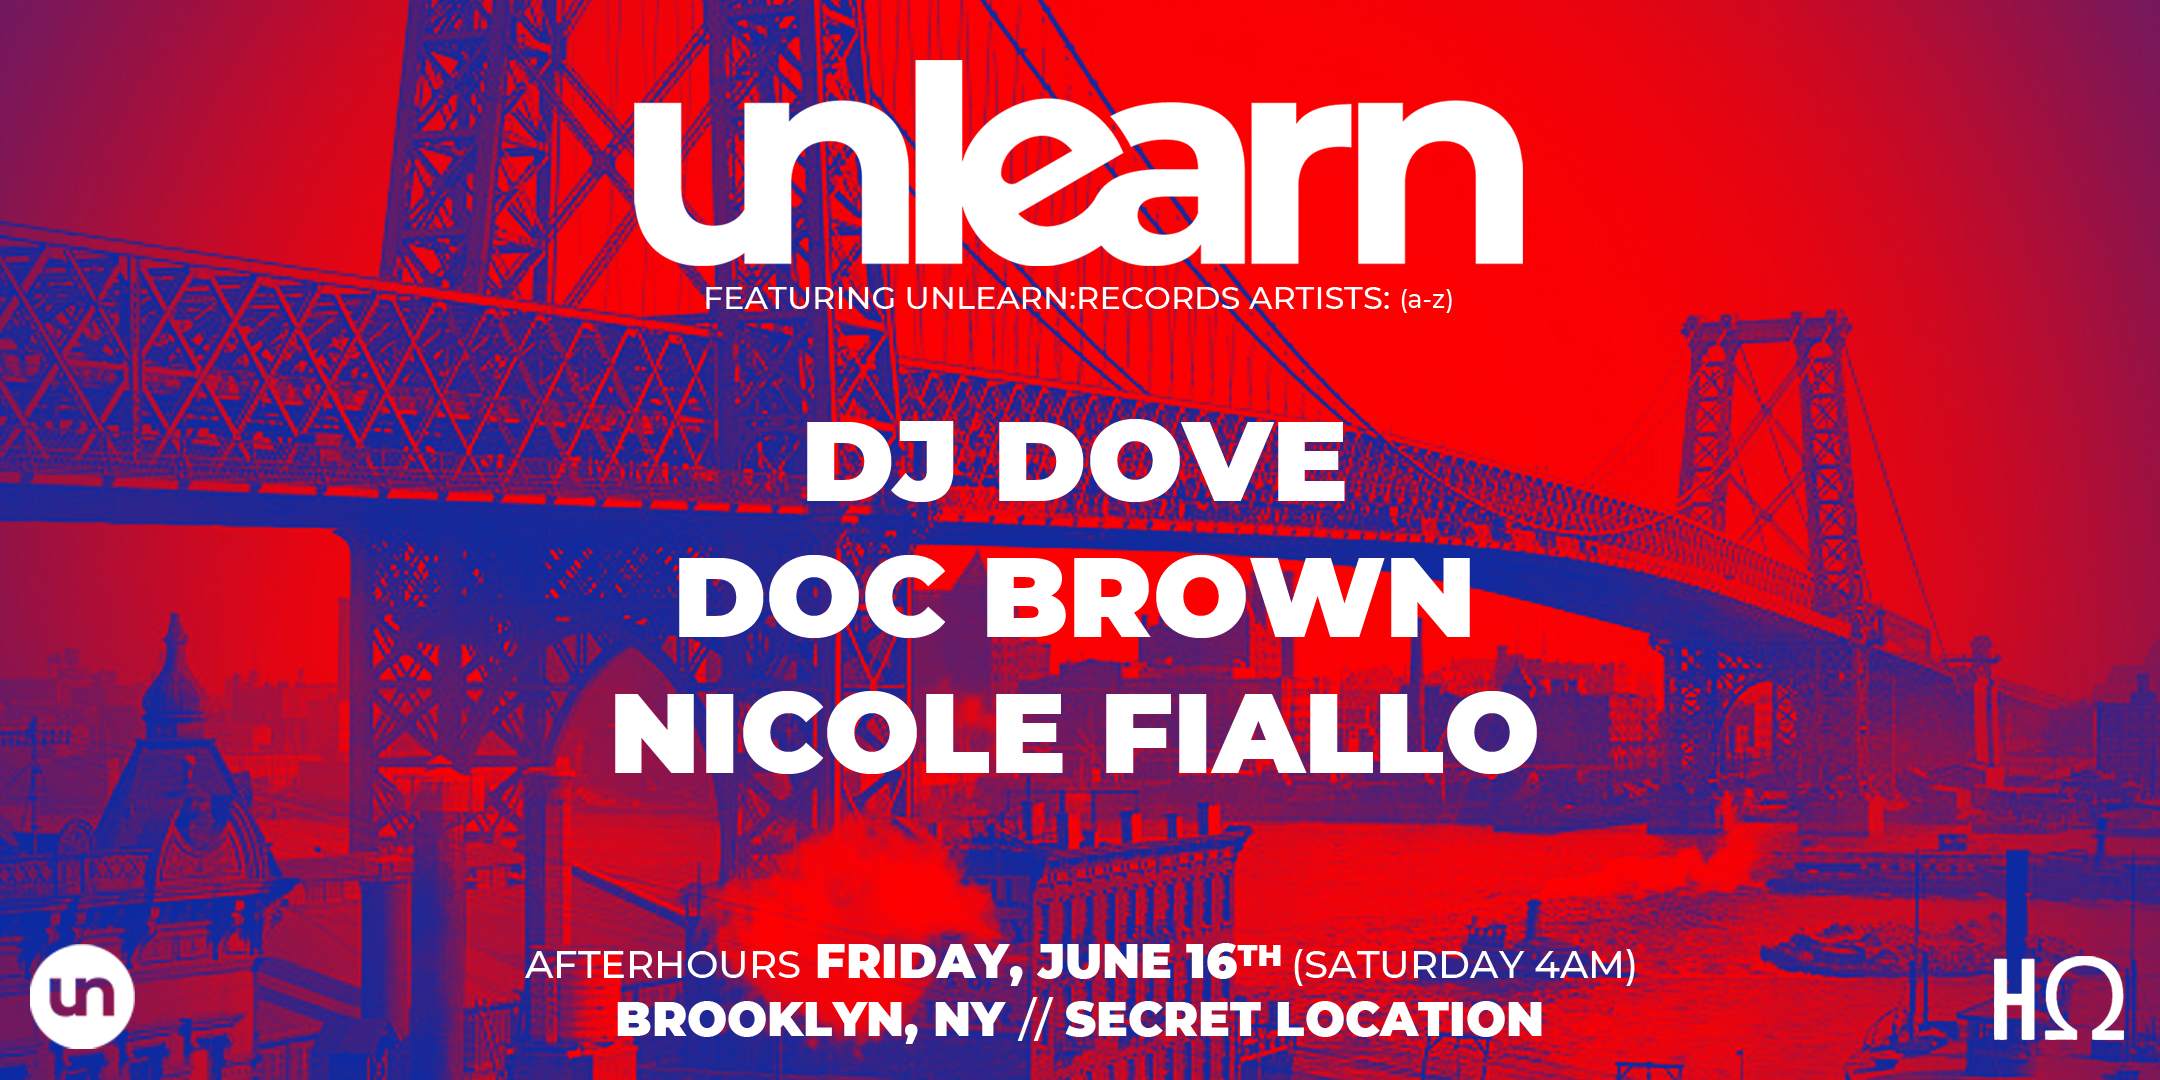 Doc Brown presents Unlearn:Records Afterhours Showcase NYC - フライヤー表